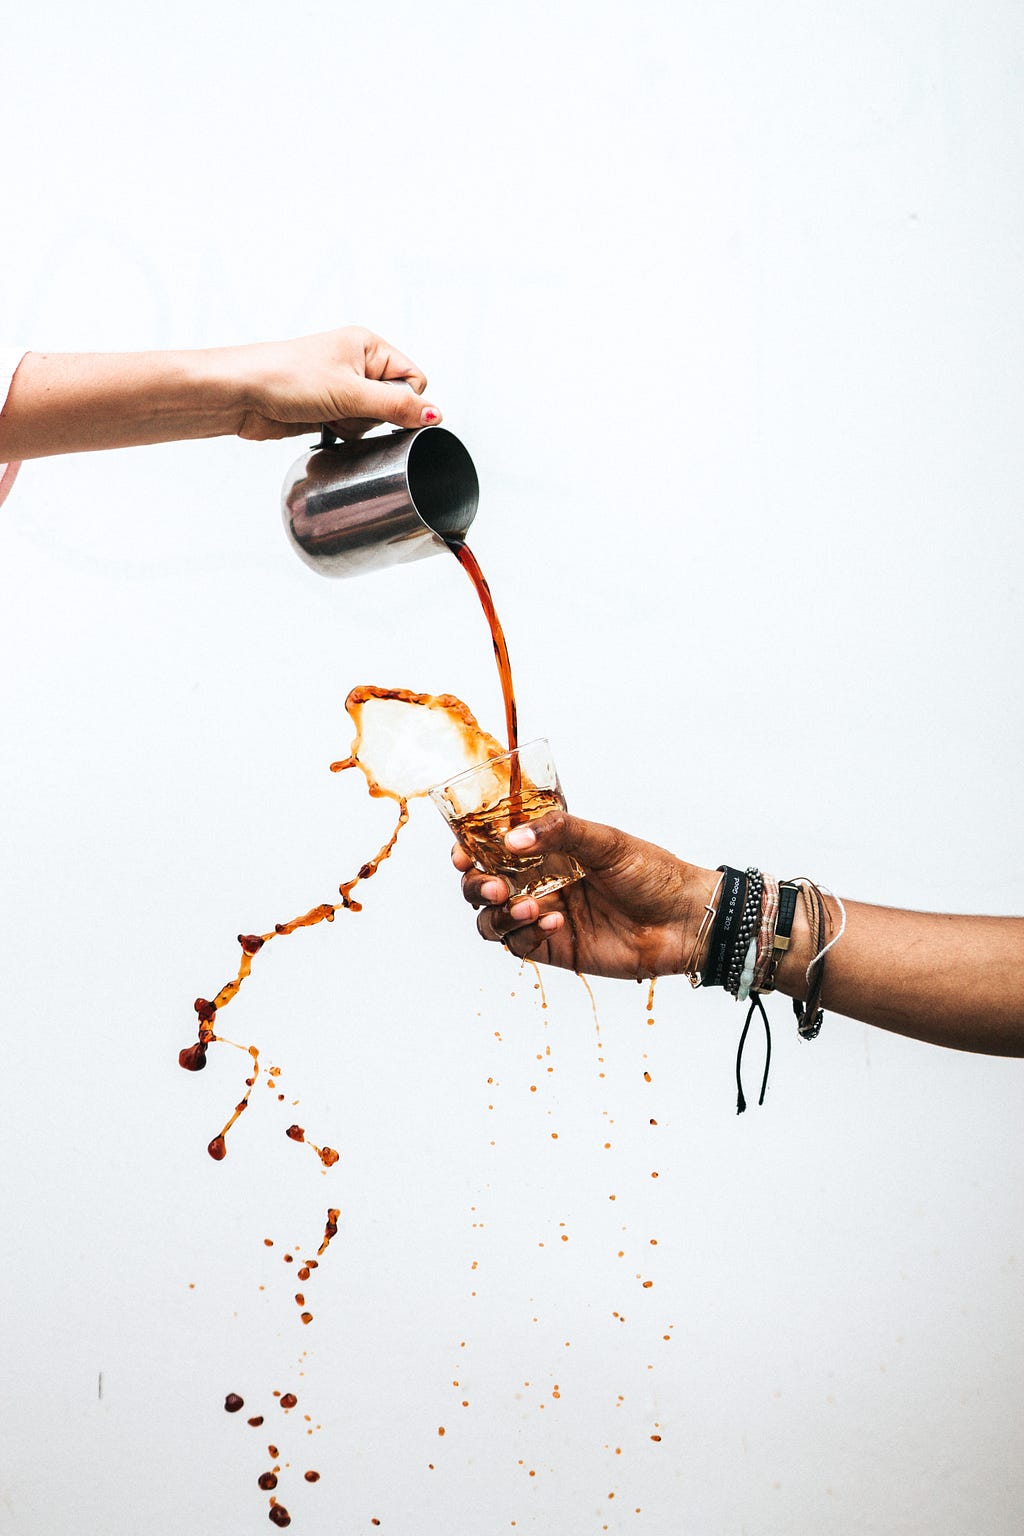 A photo of the world’s worst way to “hand off” a cup of hot coffee to another person.